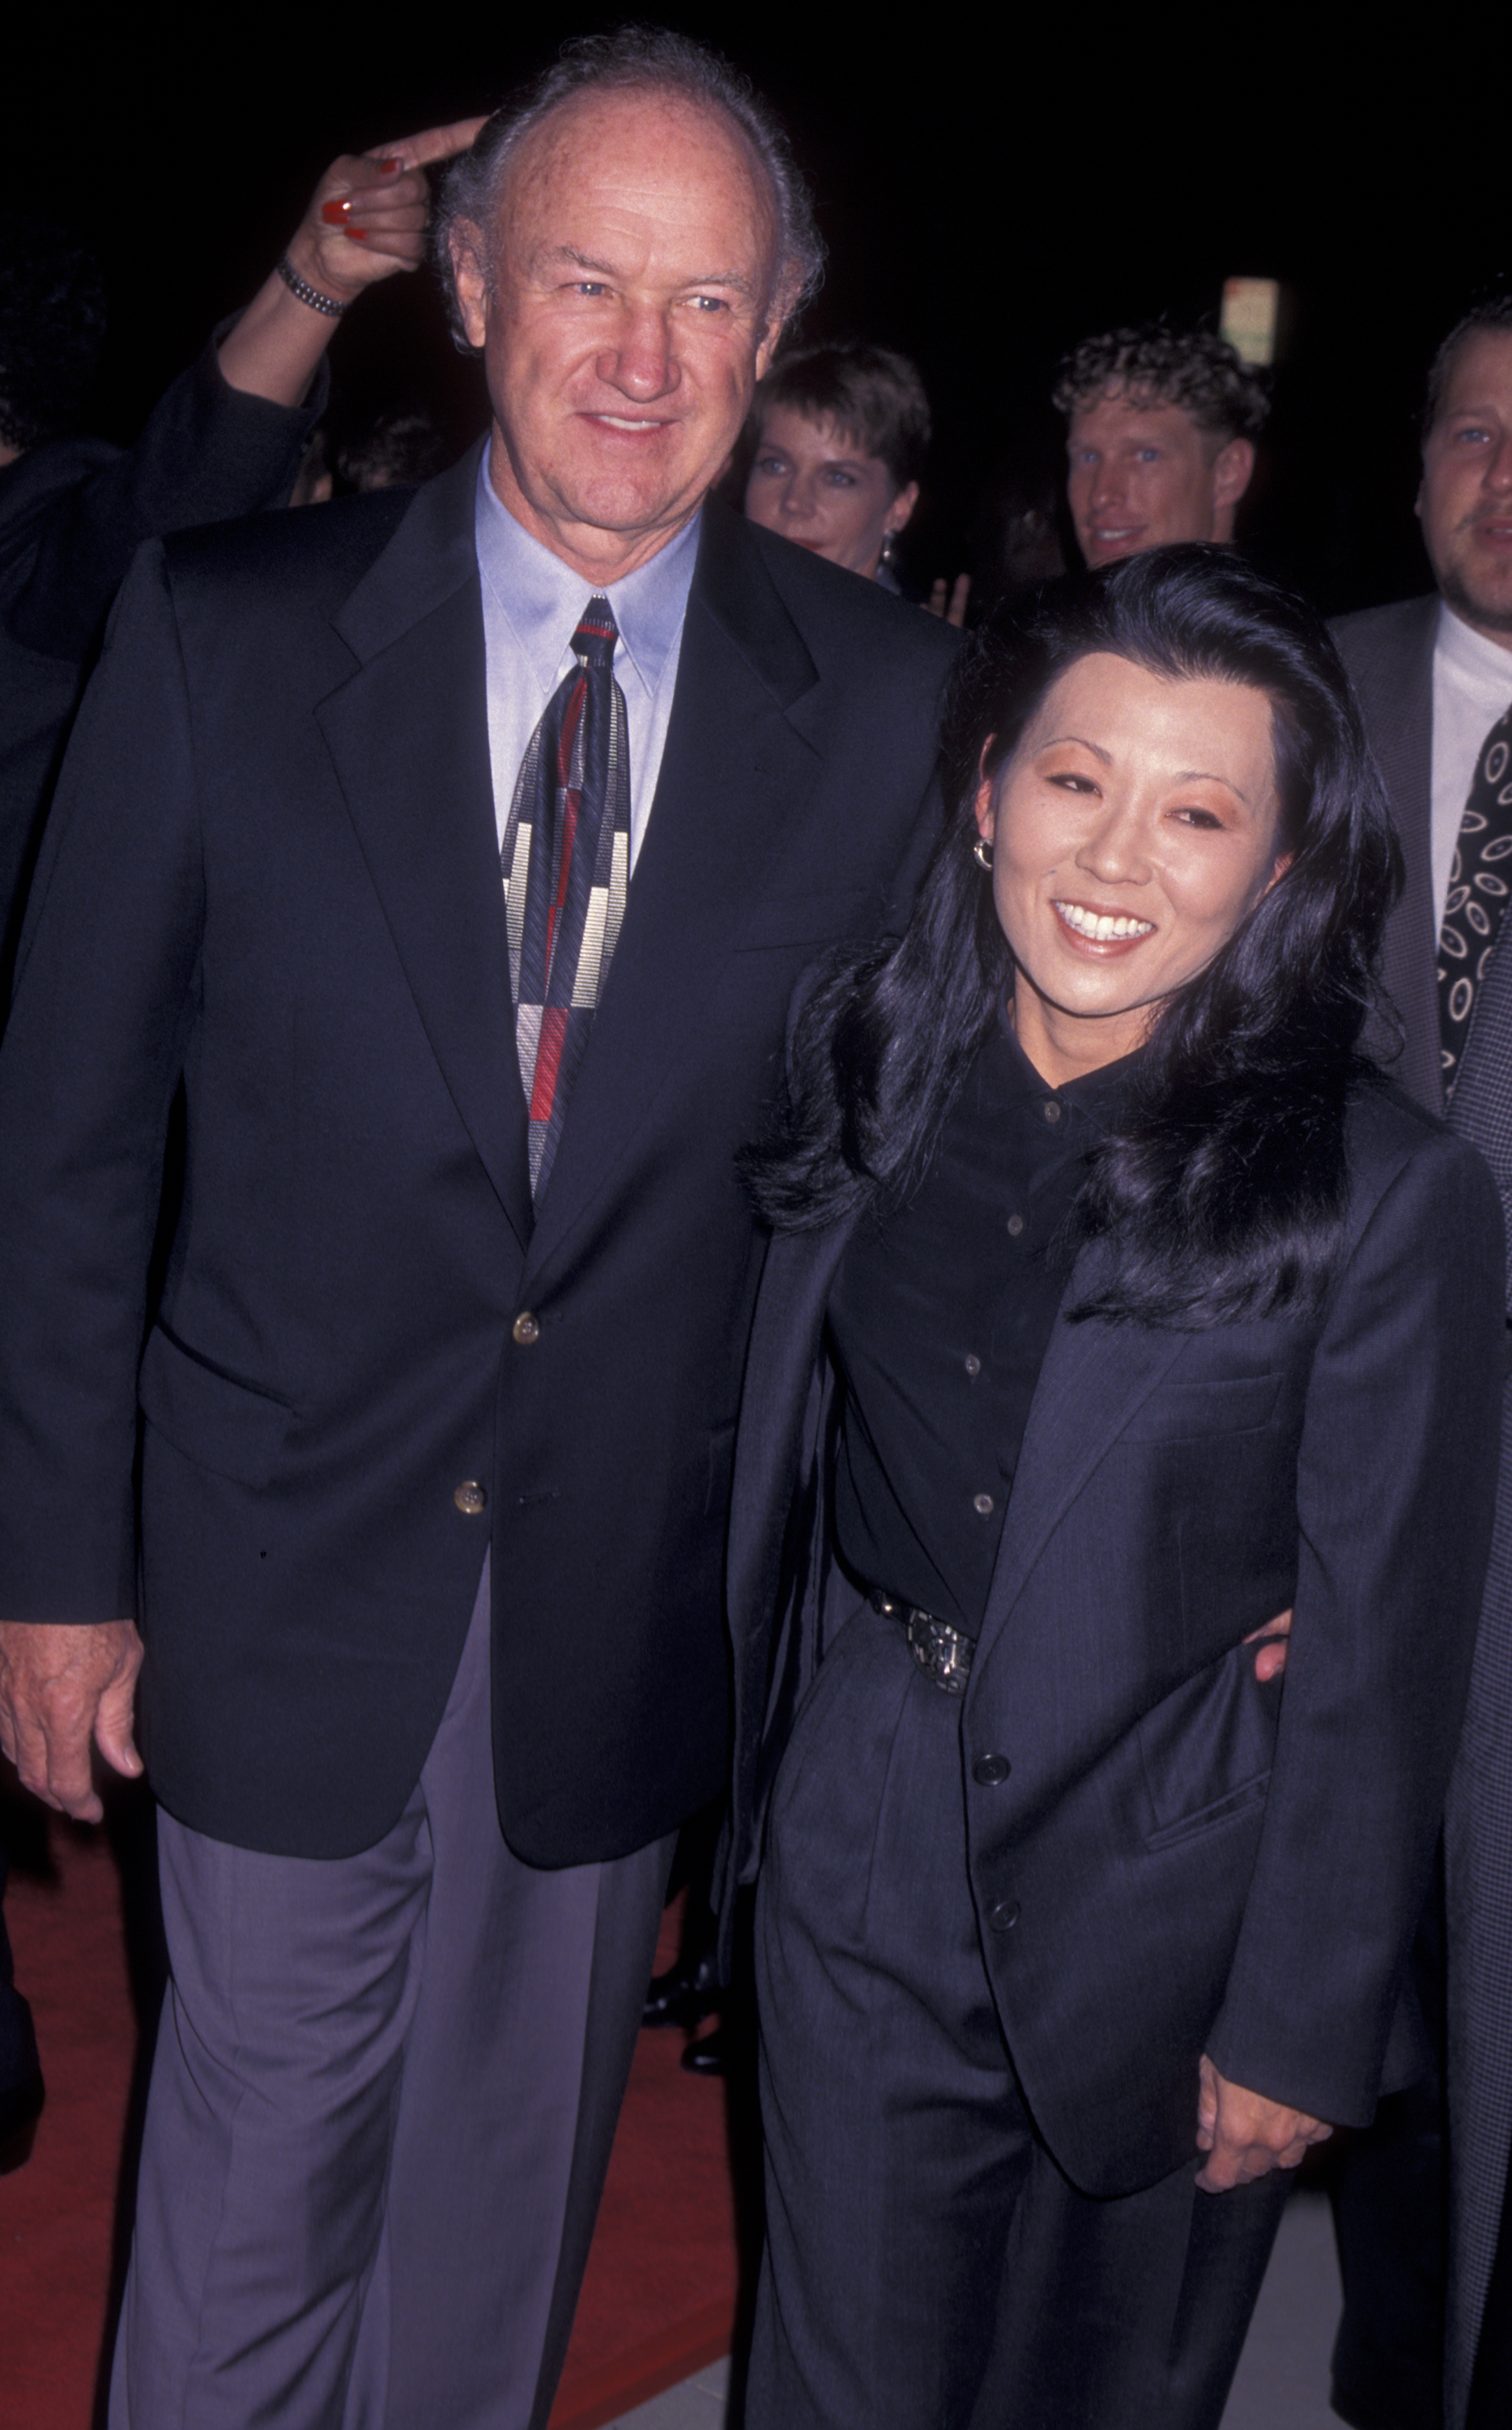 Actor Gene Hackman and wife Betsy Hackman attend the premiere of "The Chamber" on October 2, 1996, at the Academy Theater in Beverly Hills, California. | Source: Getty Images